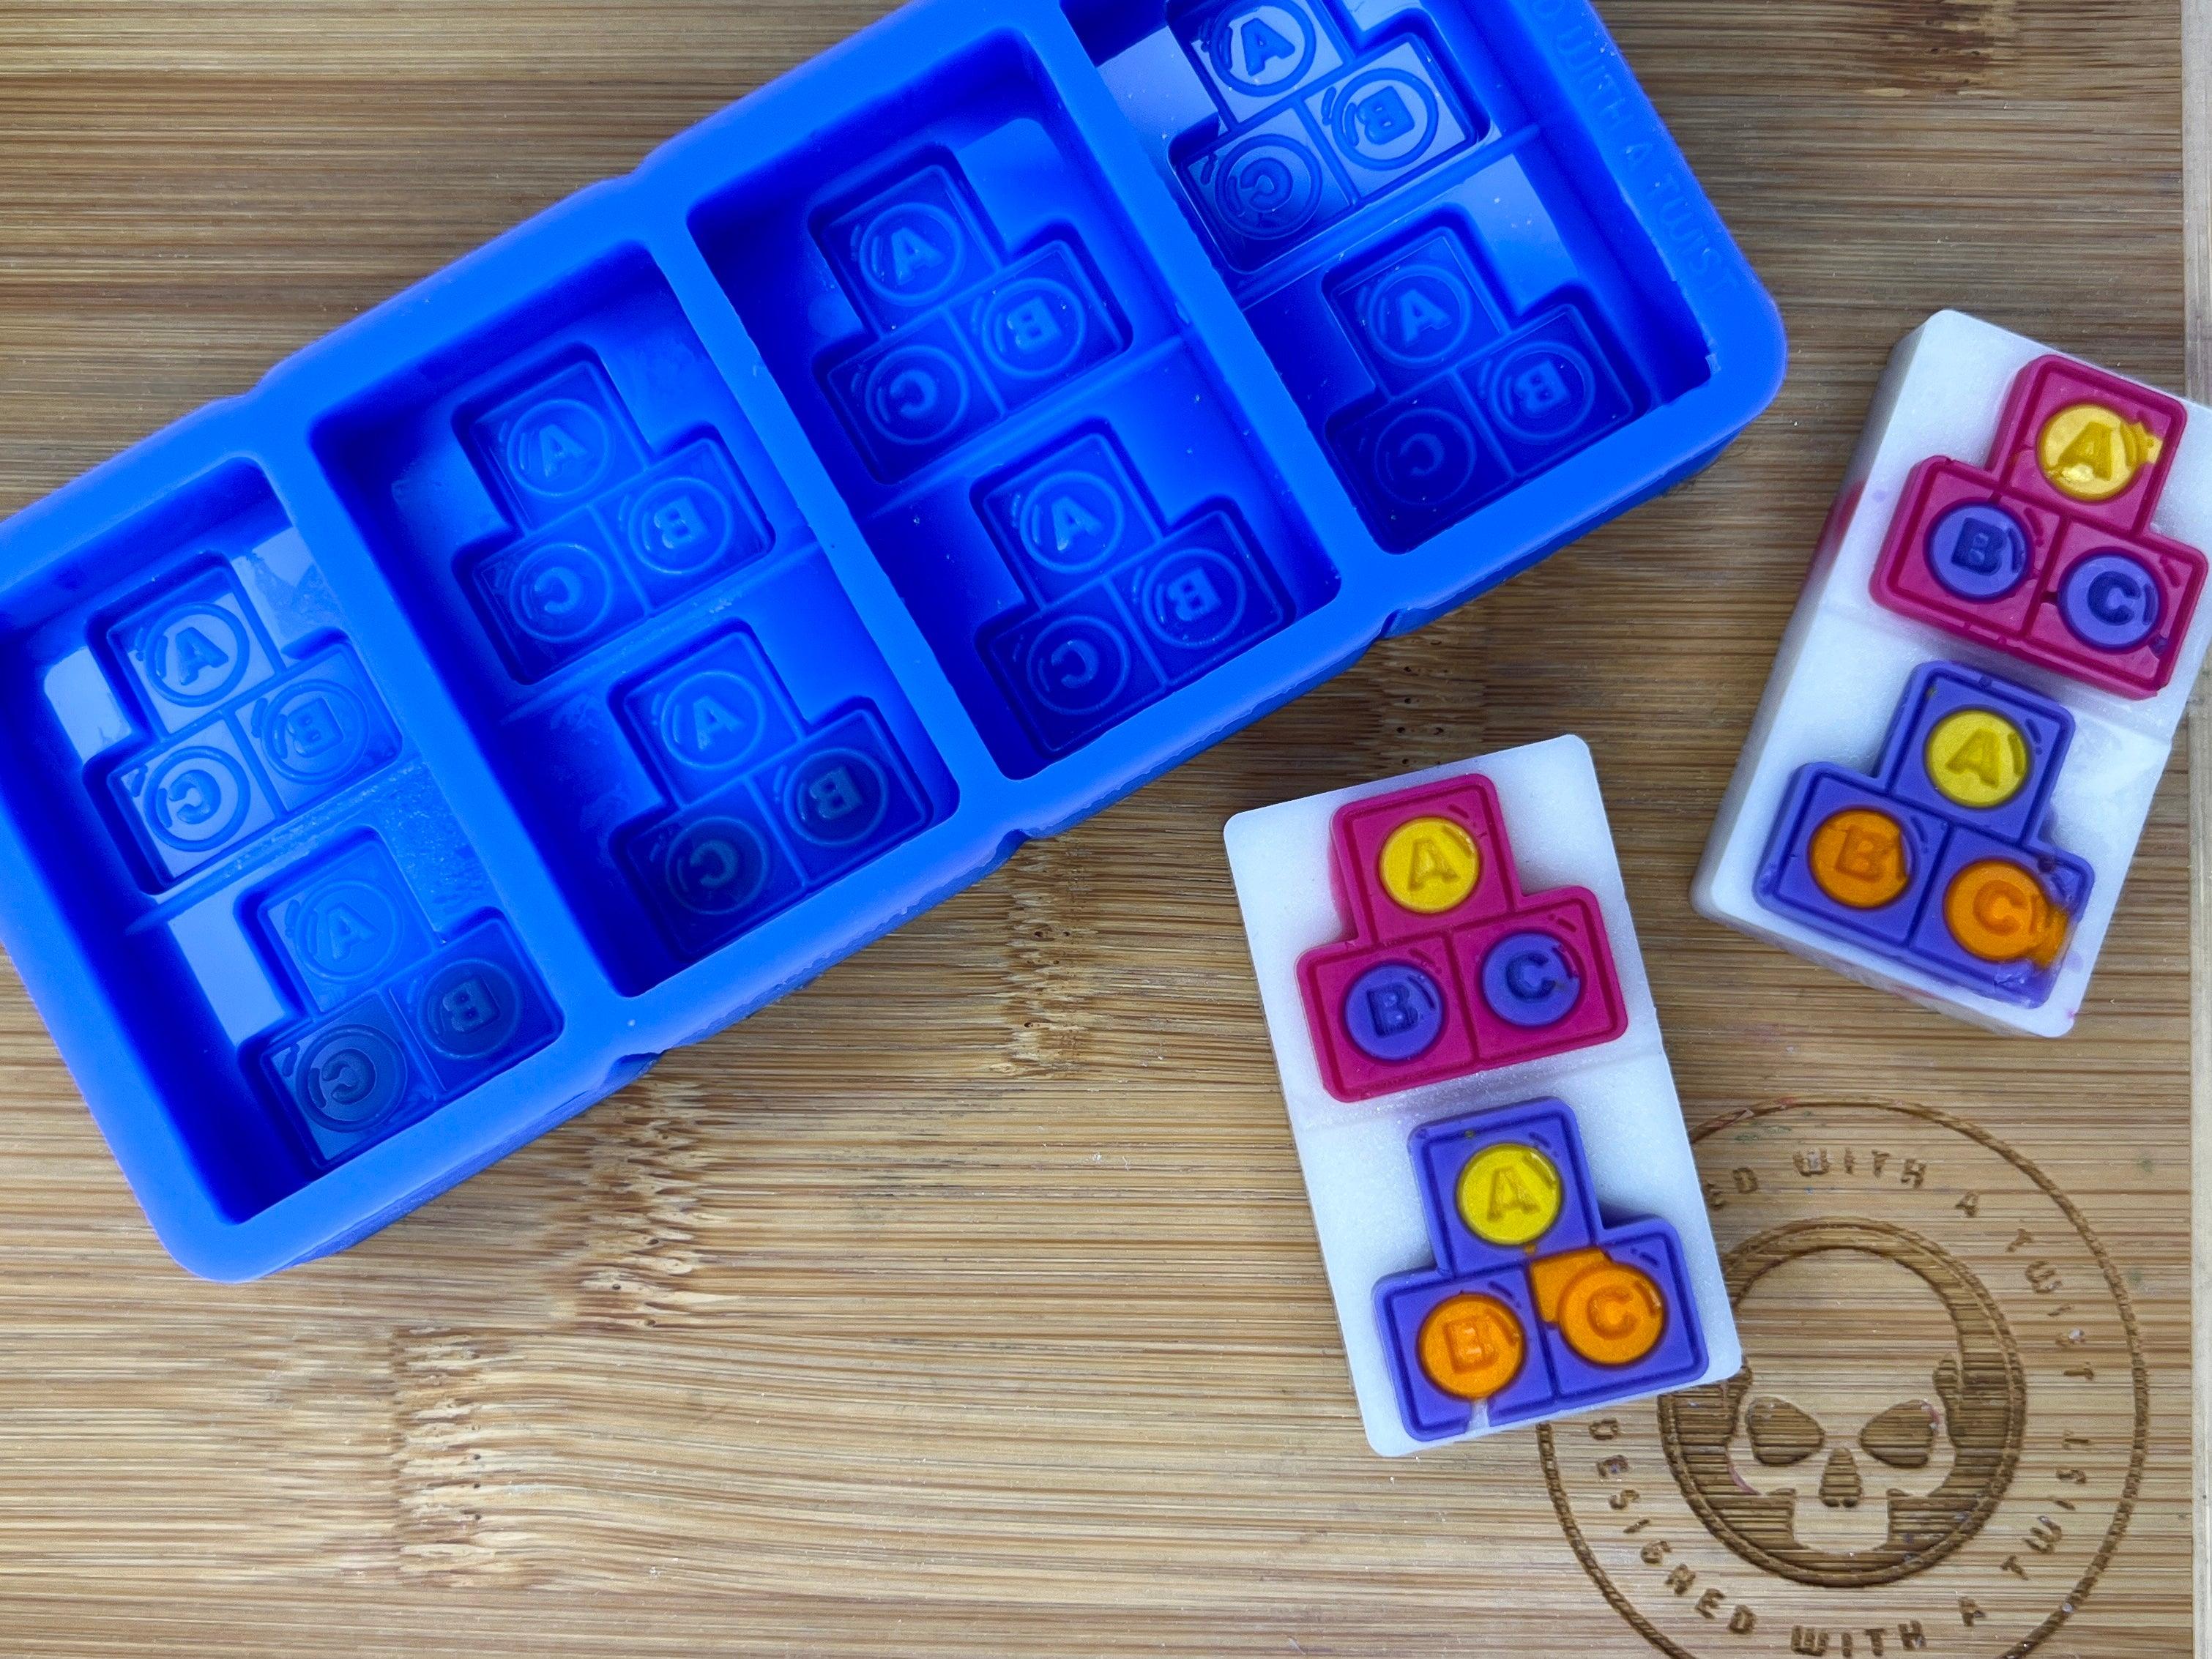 Alphabet Blocks Silicone Mold - HoBa Edition - Designed with a Twist - Top quality silicone molds made in the UK.